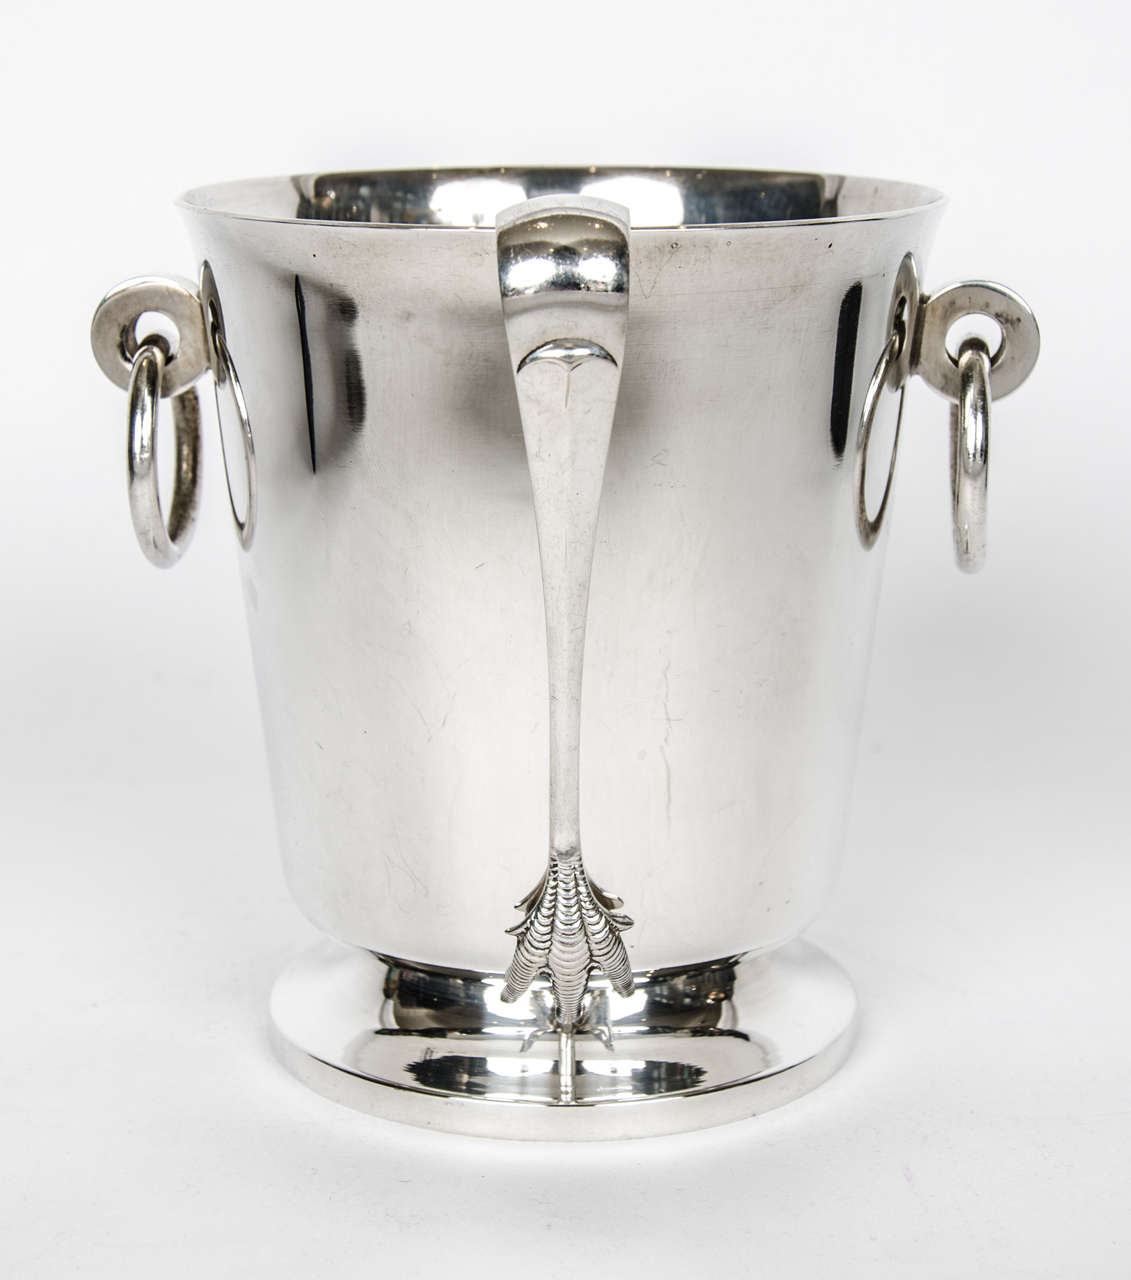 Silver plate ice bucket and tongs, circa 1920. Detailed tongs with chicken feet. Ice bucket has two ring handles in plain polished silver.

Please enquire for shipping rates due to size and nature of item.